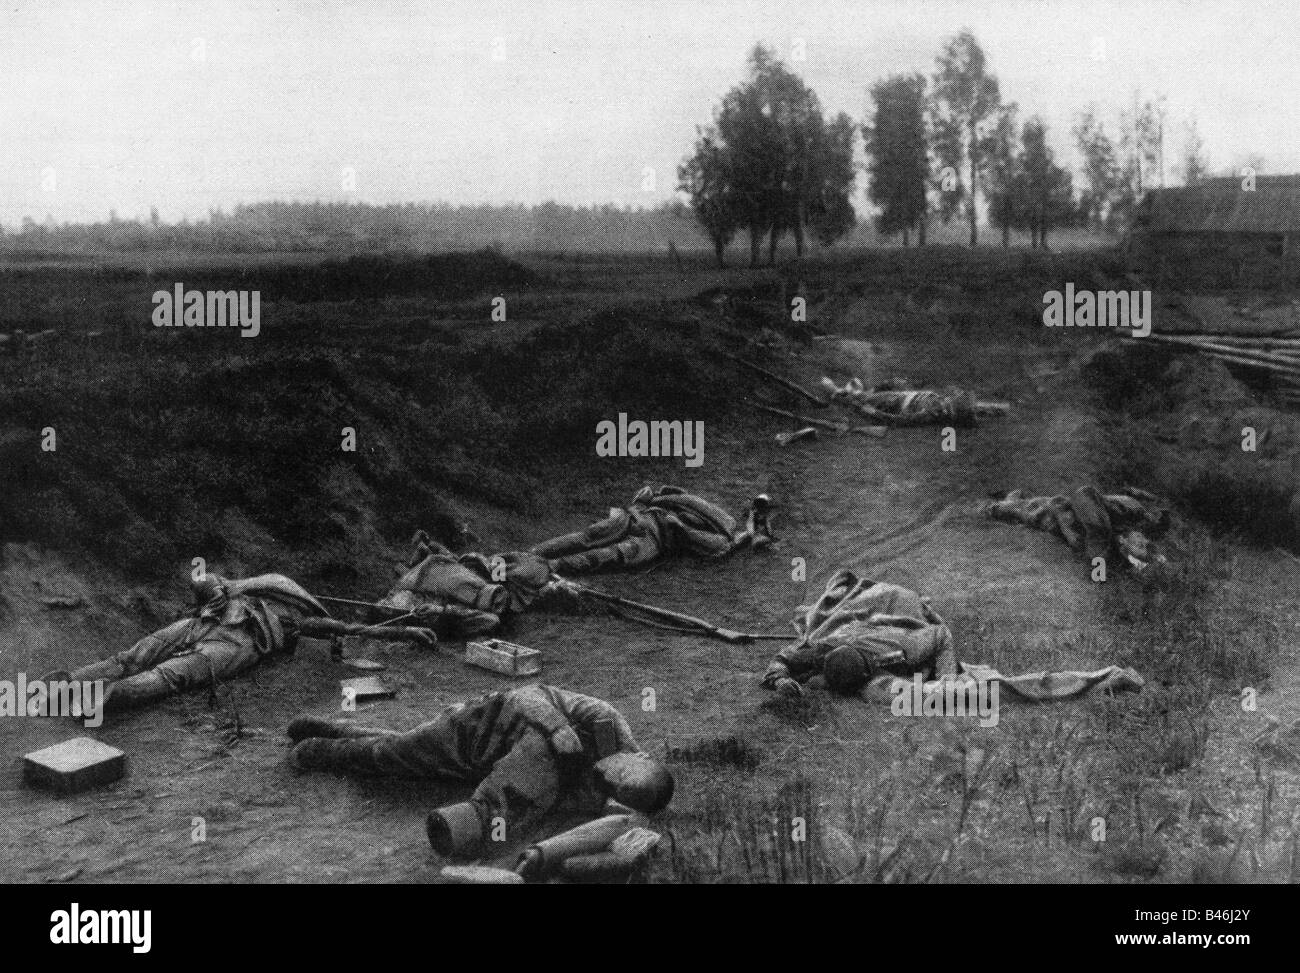 events, First World War / WWI, Eastern Front, Baltic states, fallen Russian soldiers near Riga, Latvia, 4.9.1917, Stock Photo